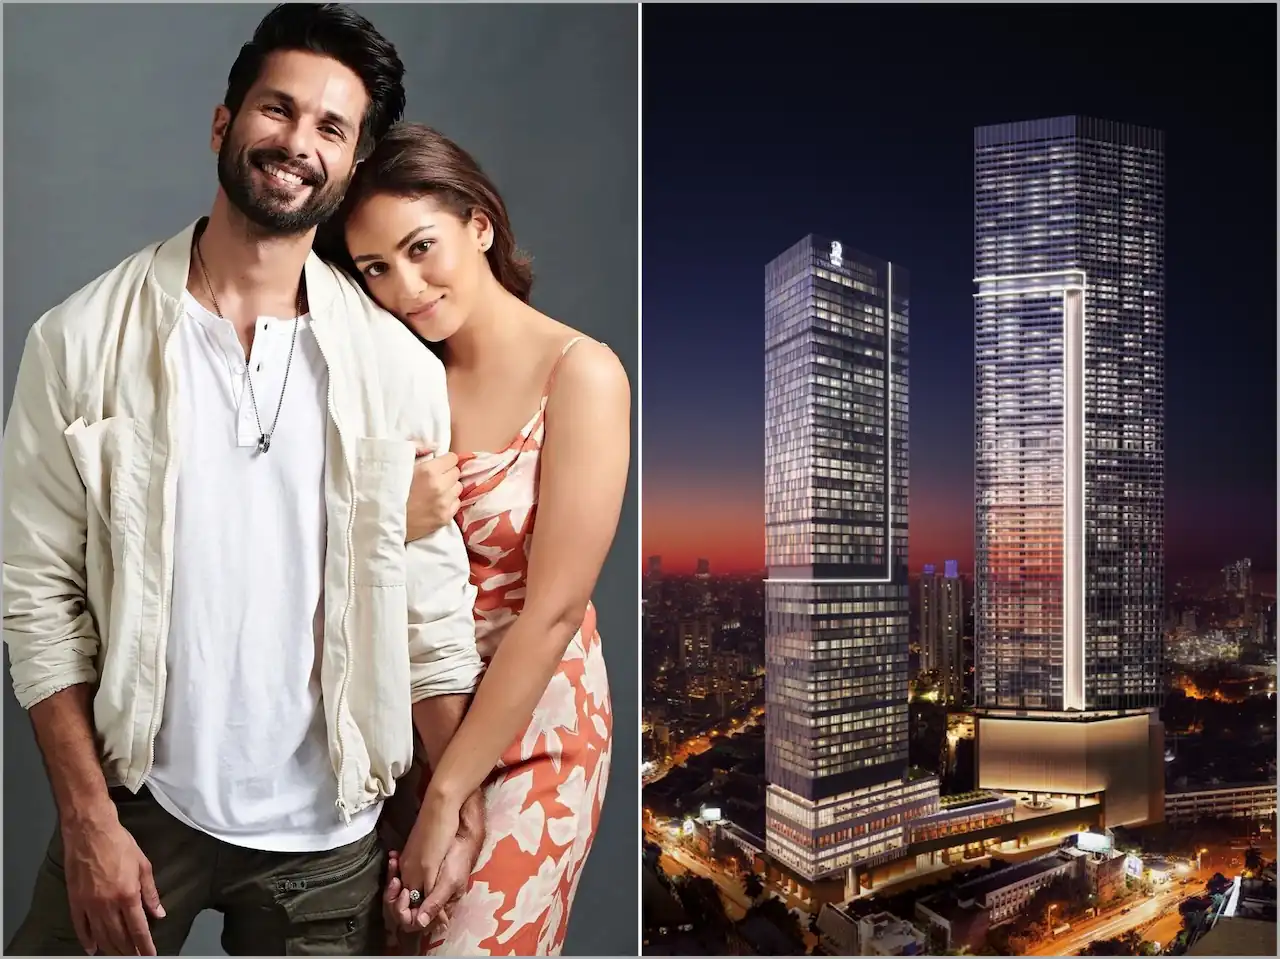 Shahid-Kapoor-and-his-wife-Mira-Rajput-have-purchased-another-sea-facing-apartment-in-a-high-rise-building-in-Worli-Mumbai-for-Rs-59-crore